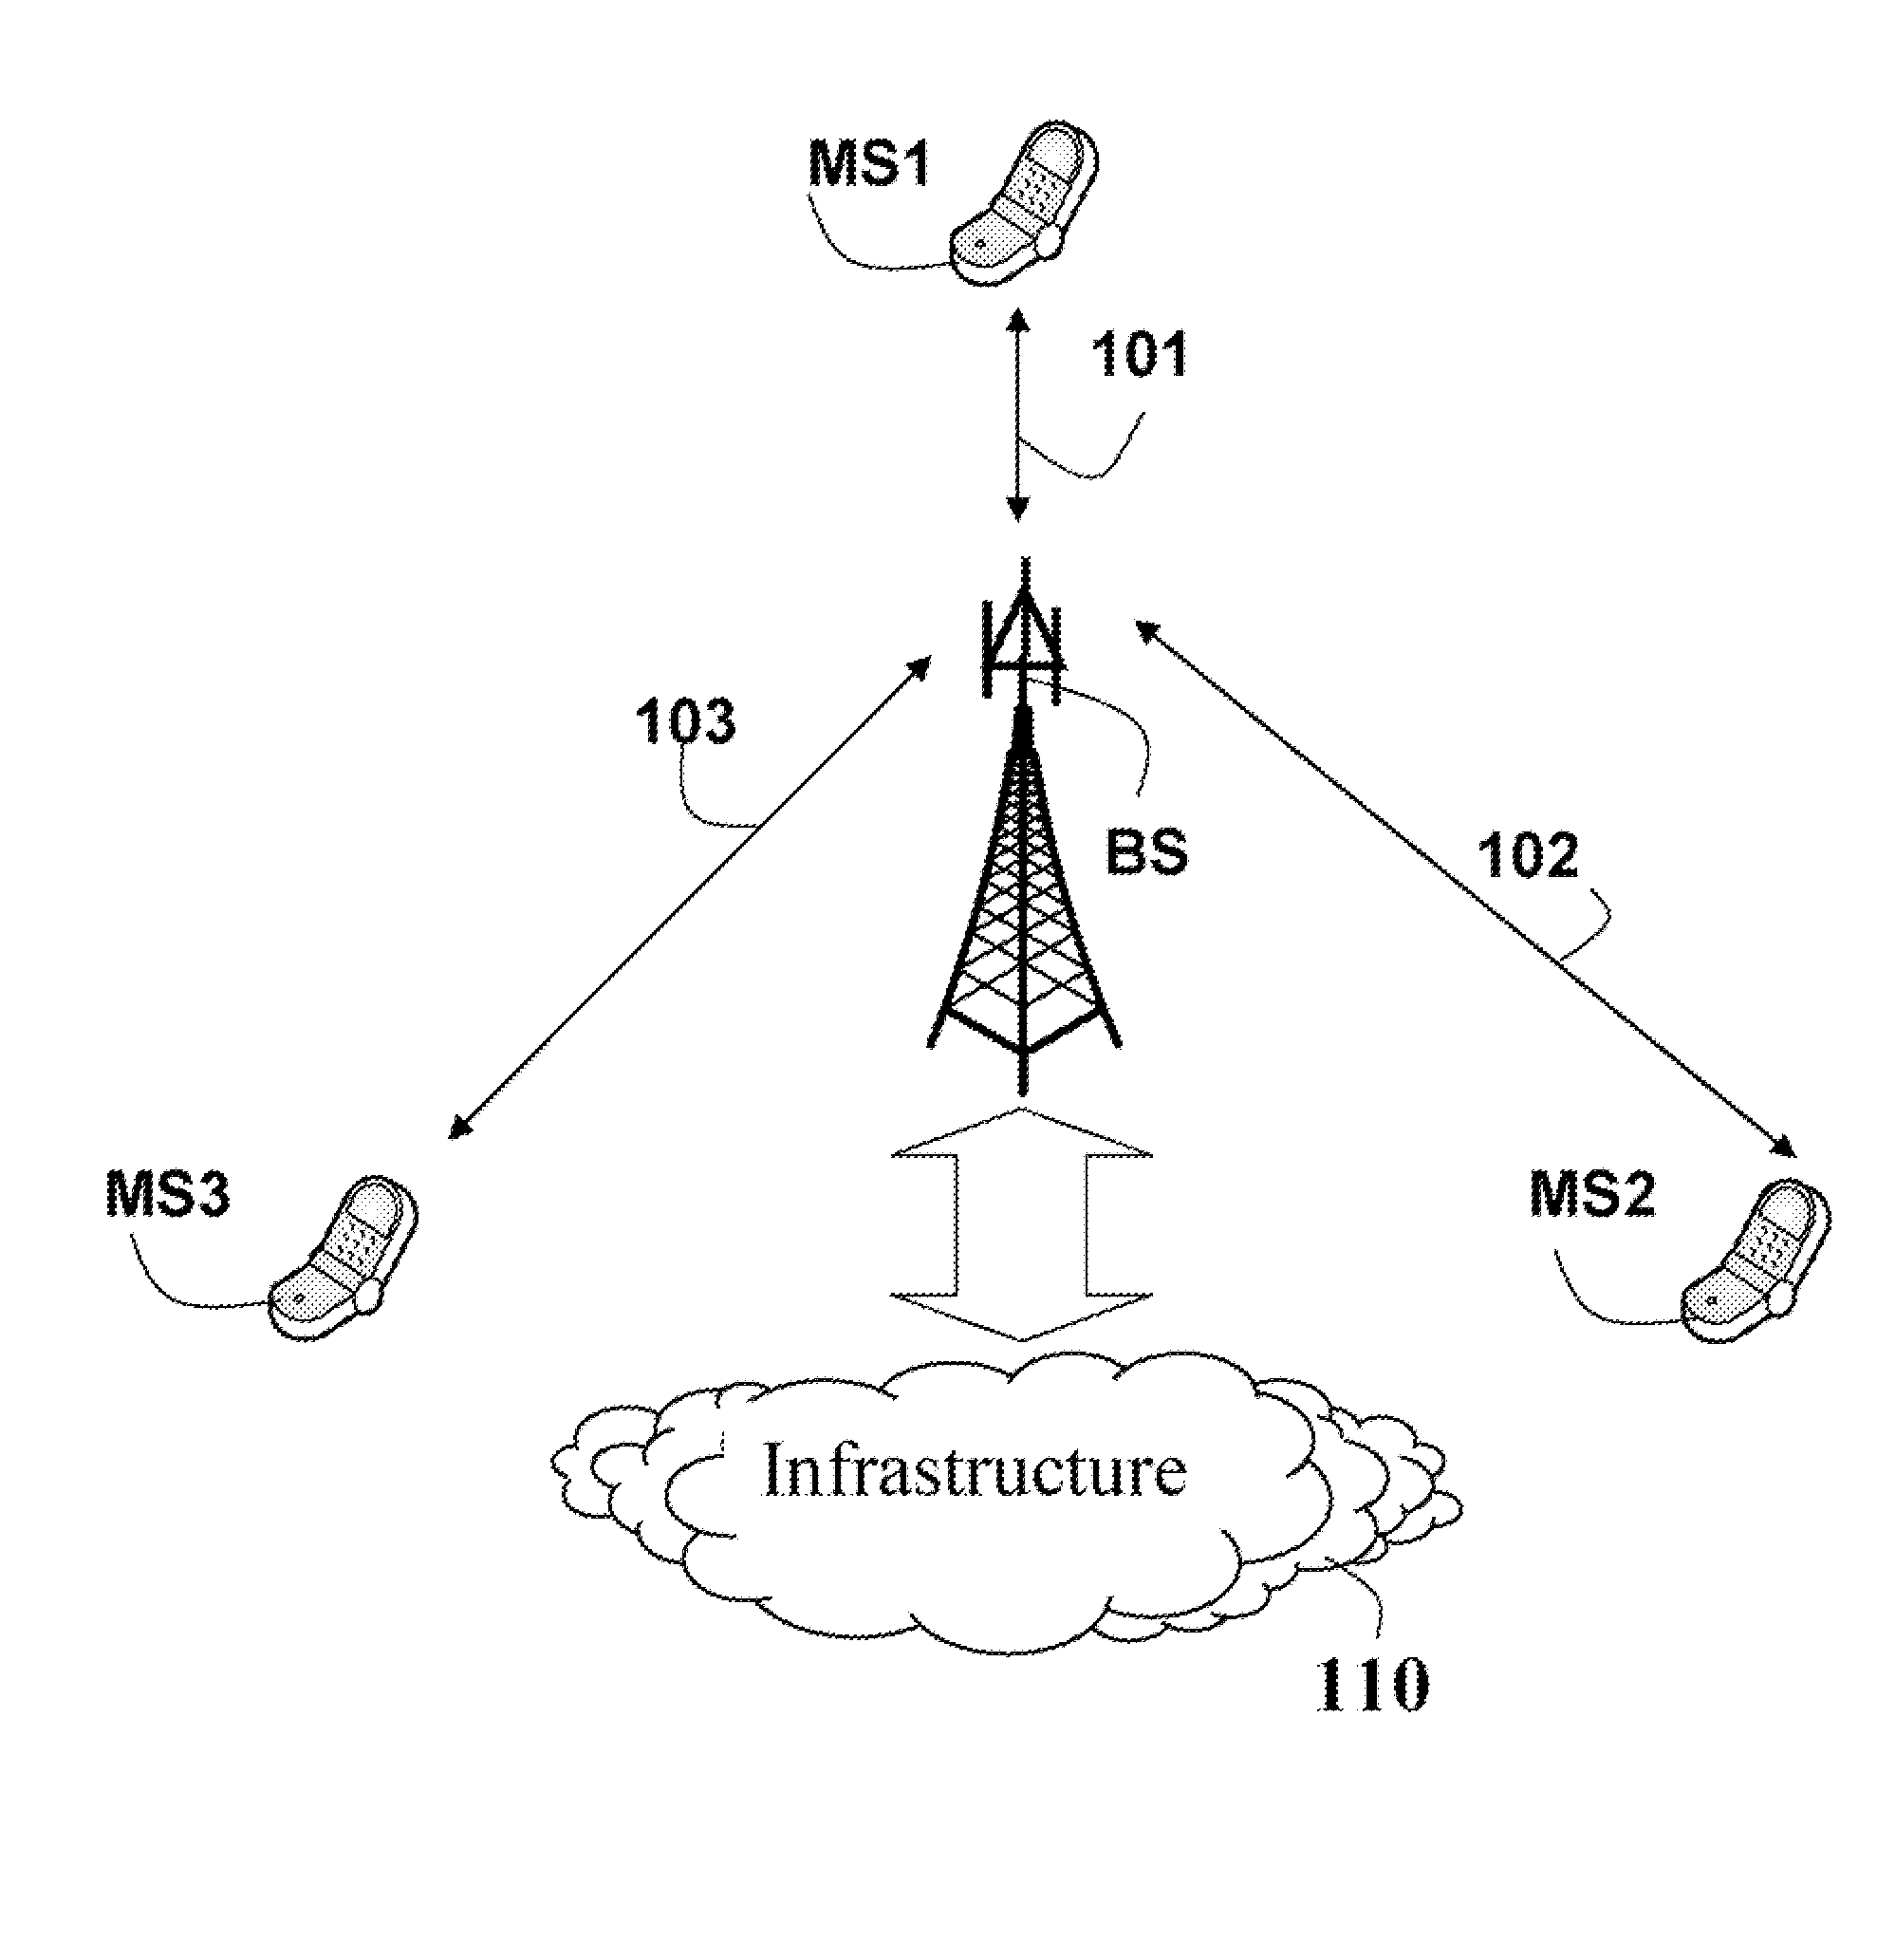 Method and System for Selecting Antennas Adaptively in OFDMA Networks